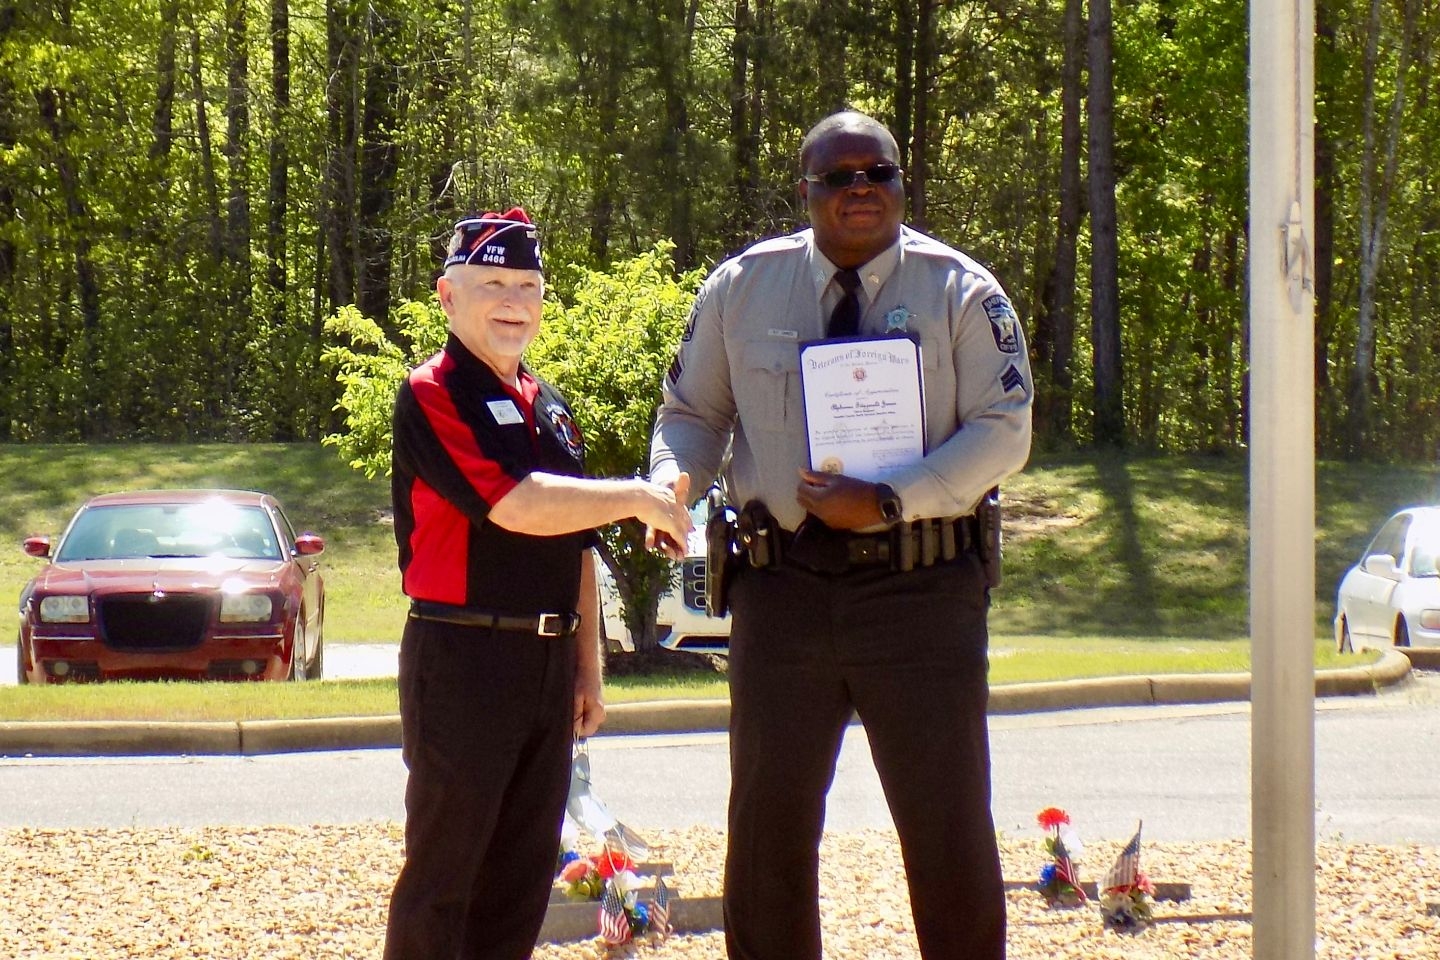 Patrol Sergeant Alphanso James of the Franklin County Sheriff's Department.